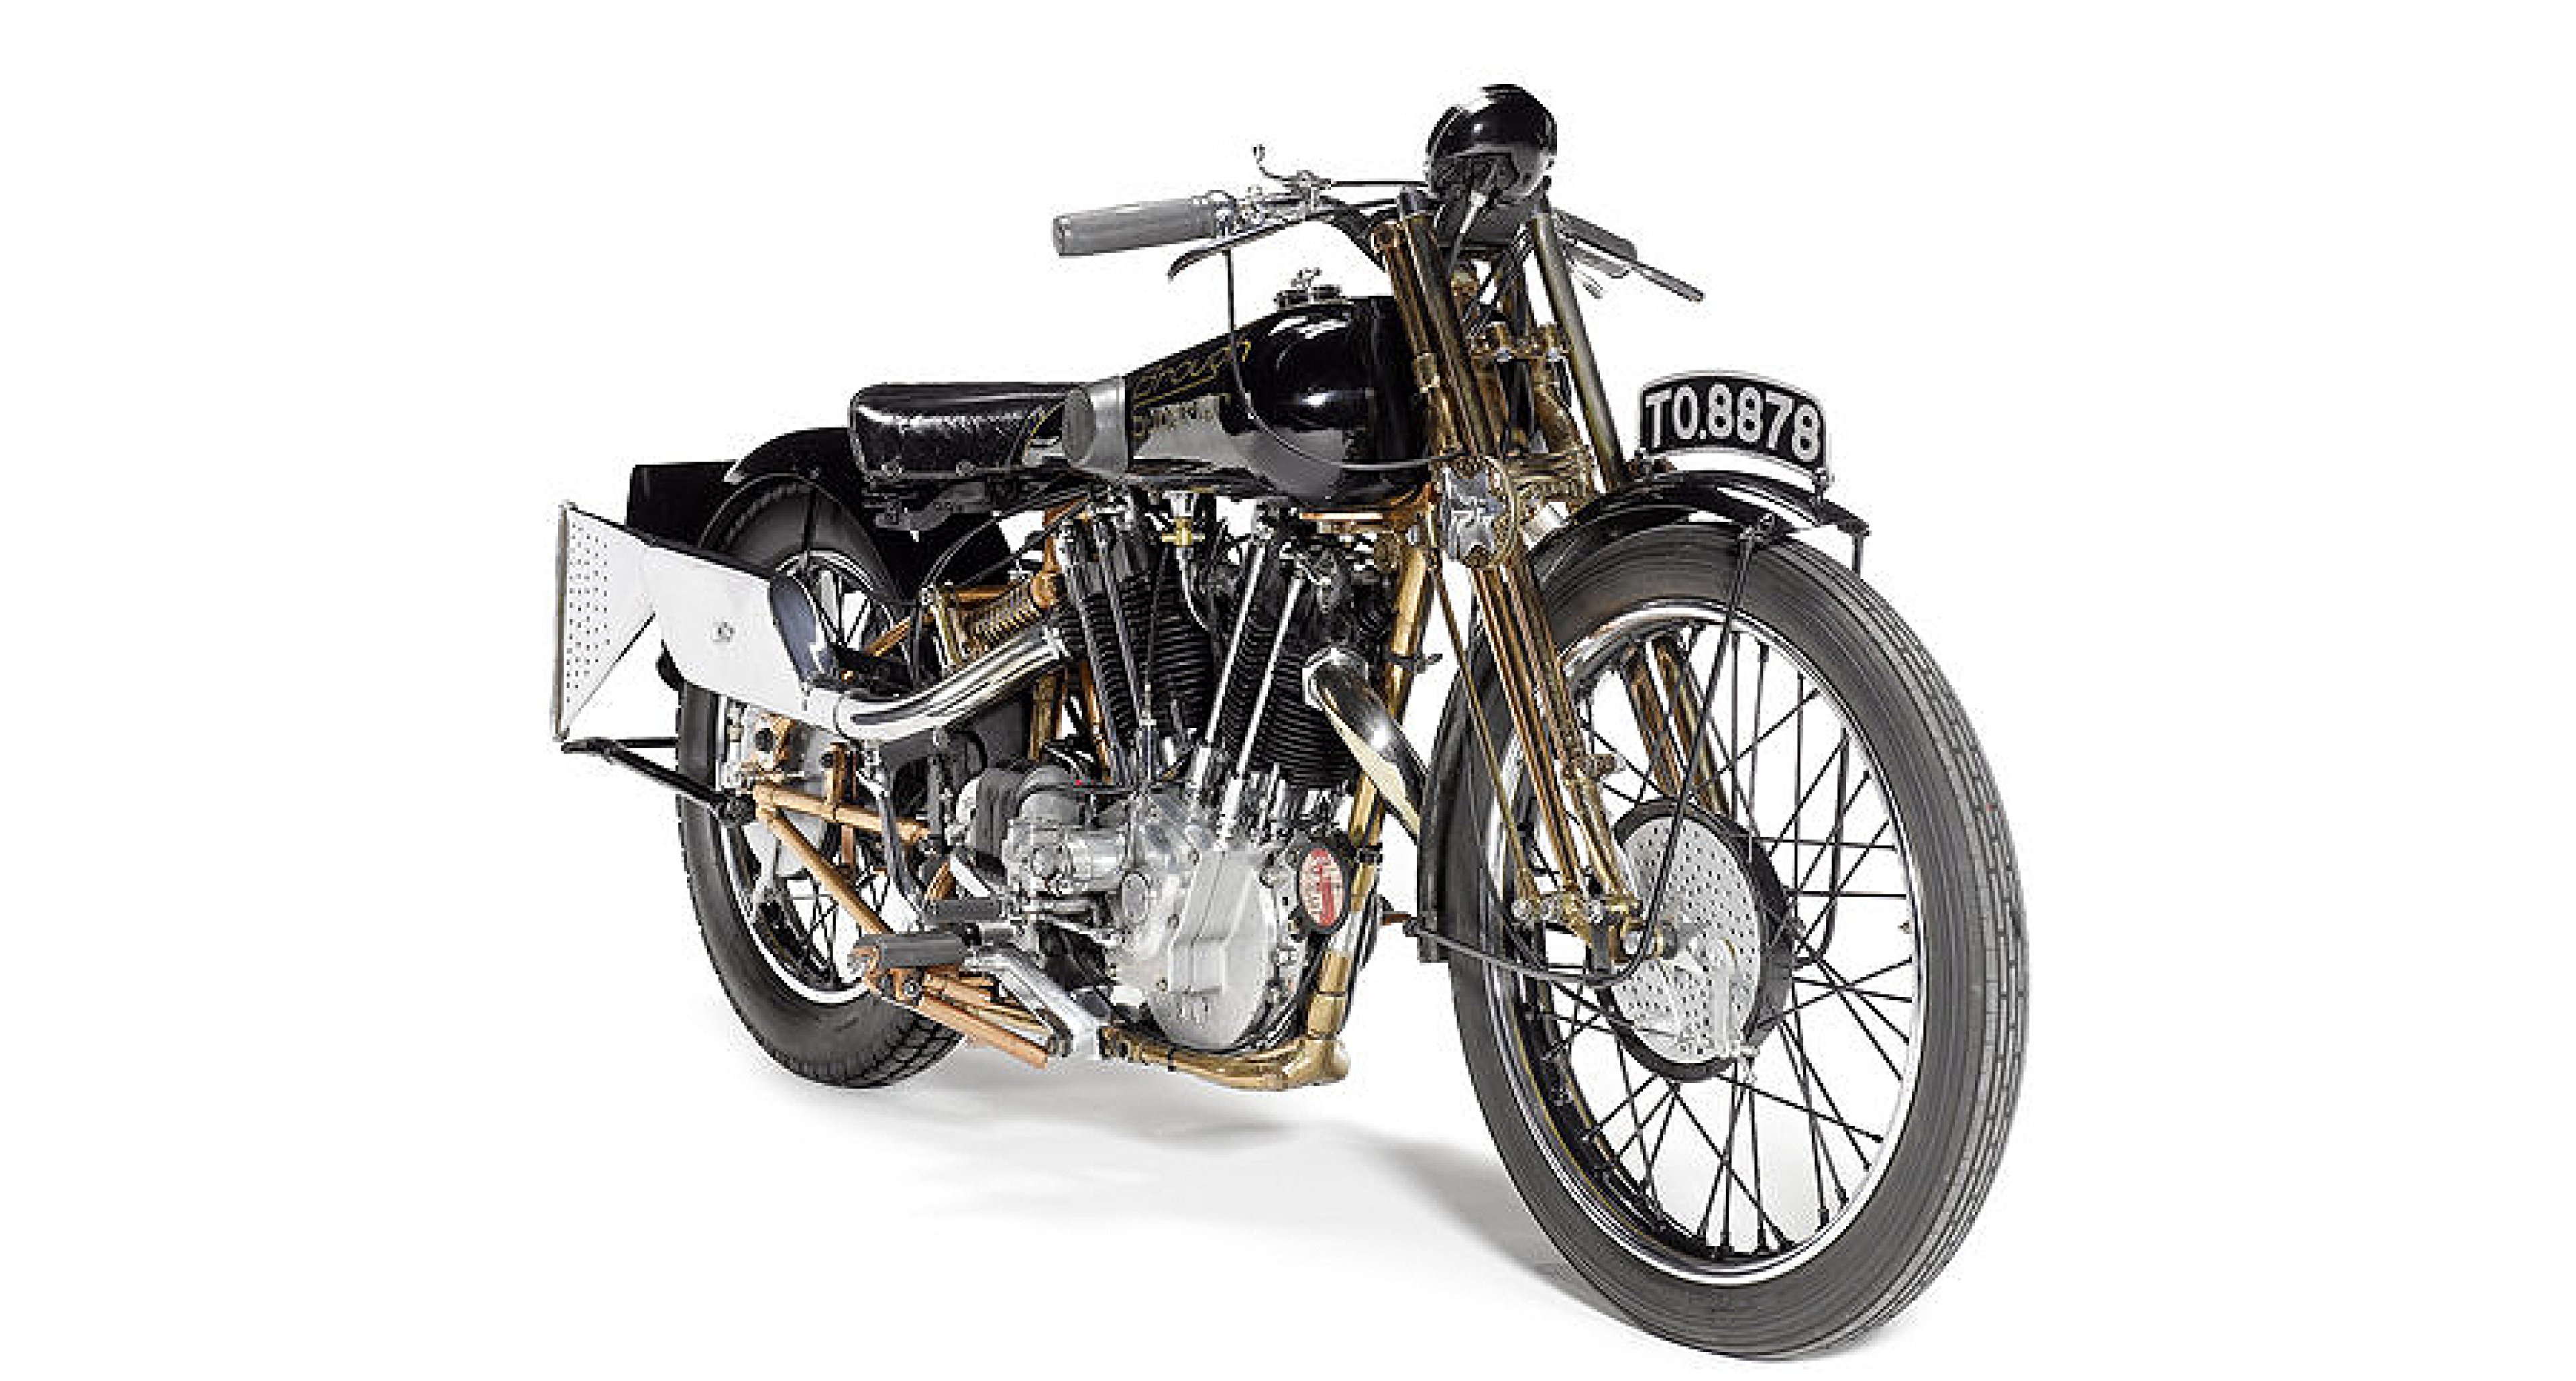 Brough Superior SS100 set to become world's most expensive motorcycle